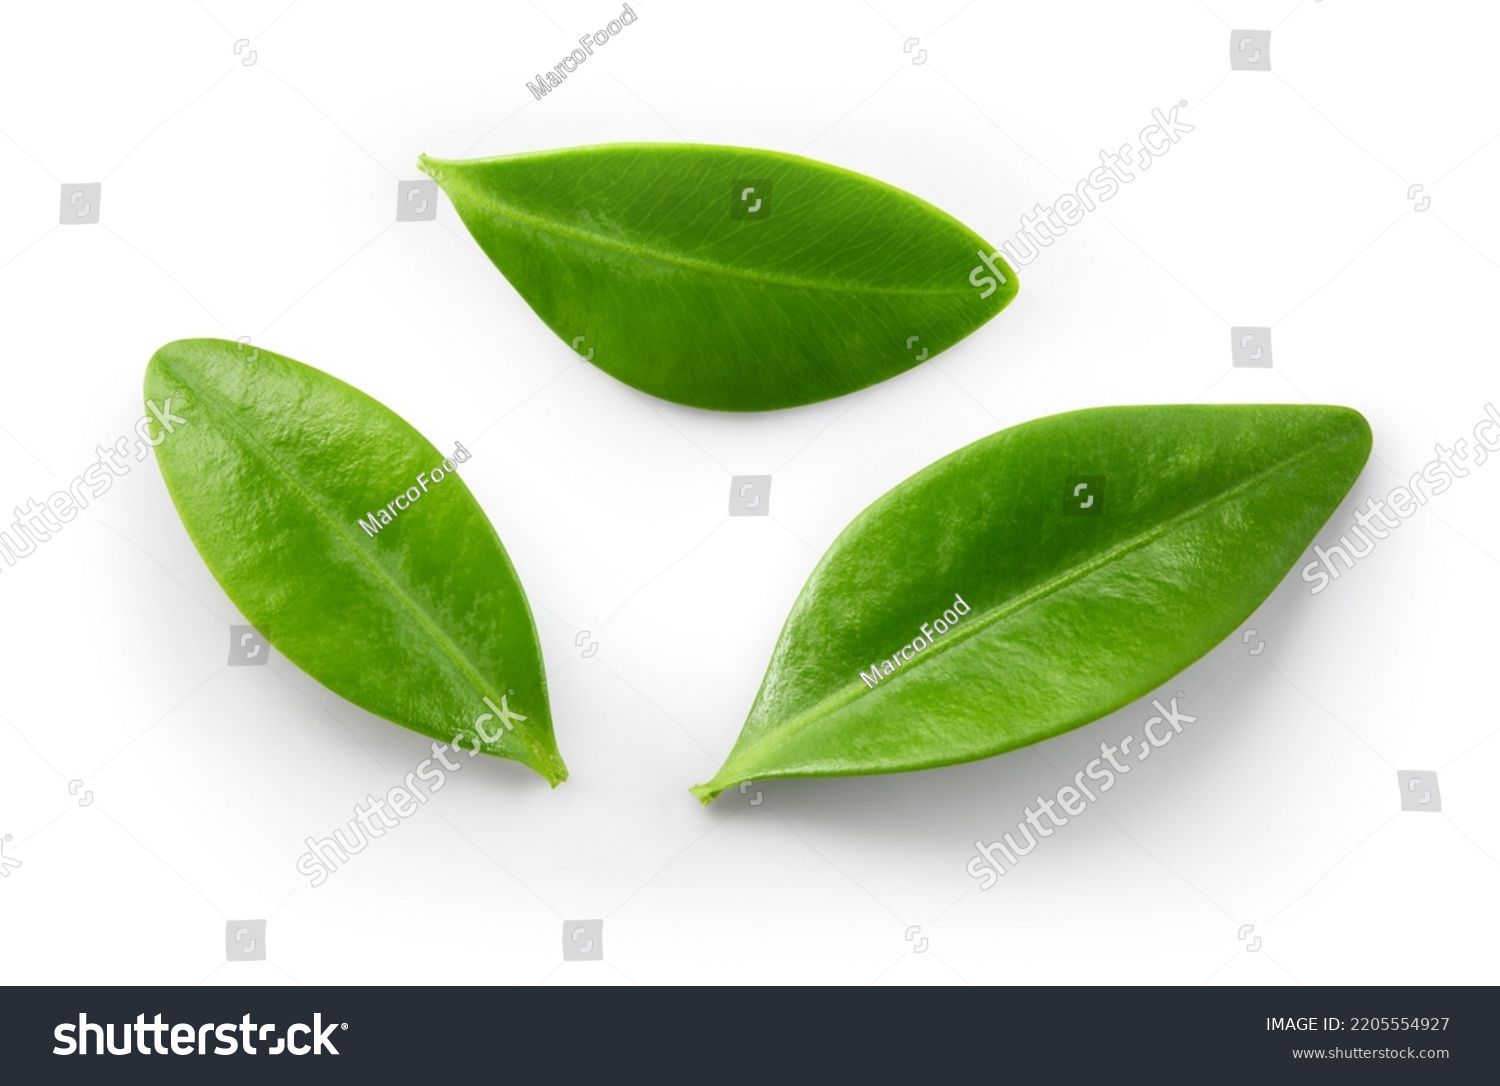 Blueberry leaf isolated.  Blueberry leaves flat lay on white background with clipping path. #2205554927